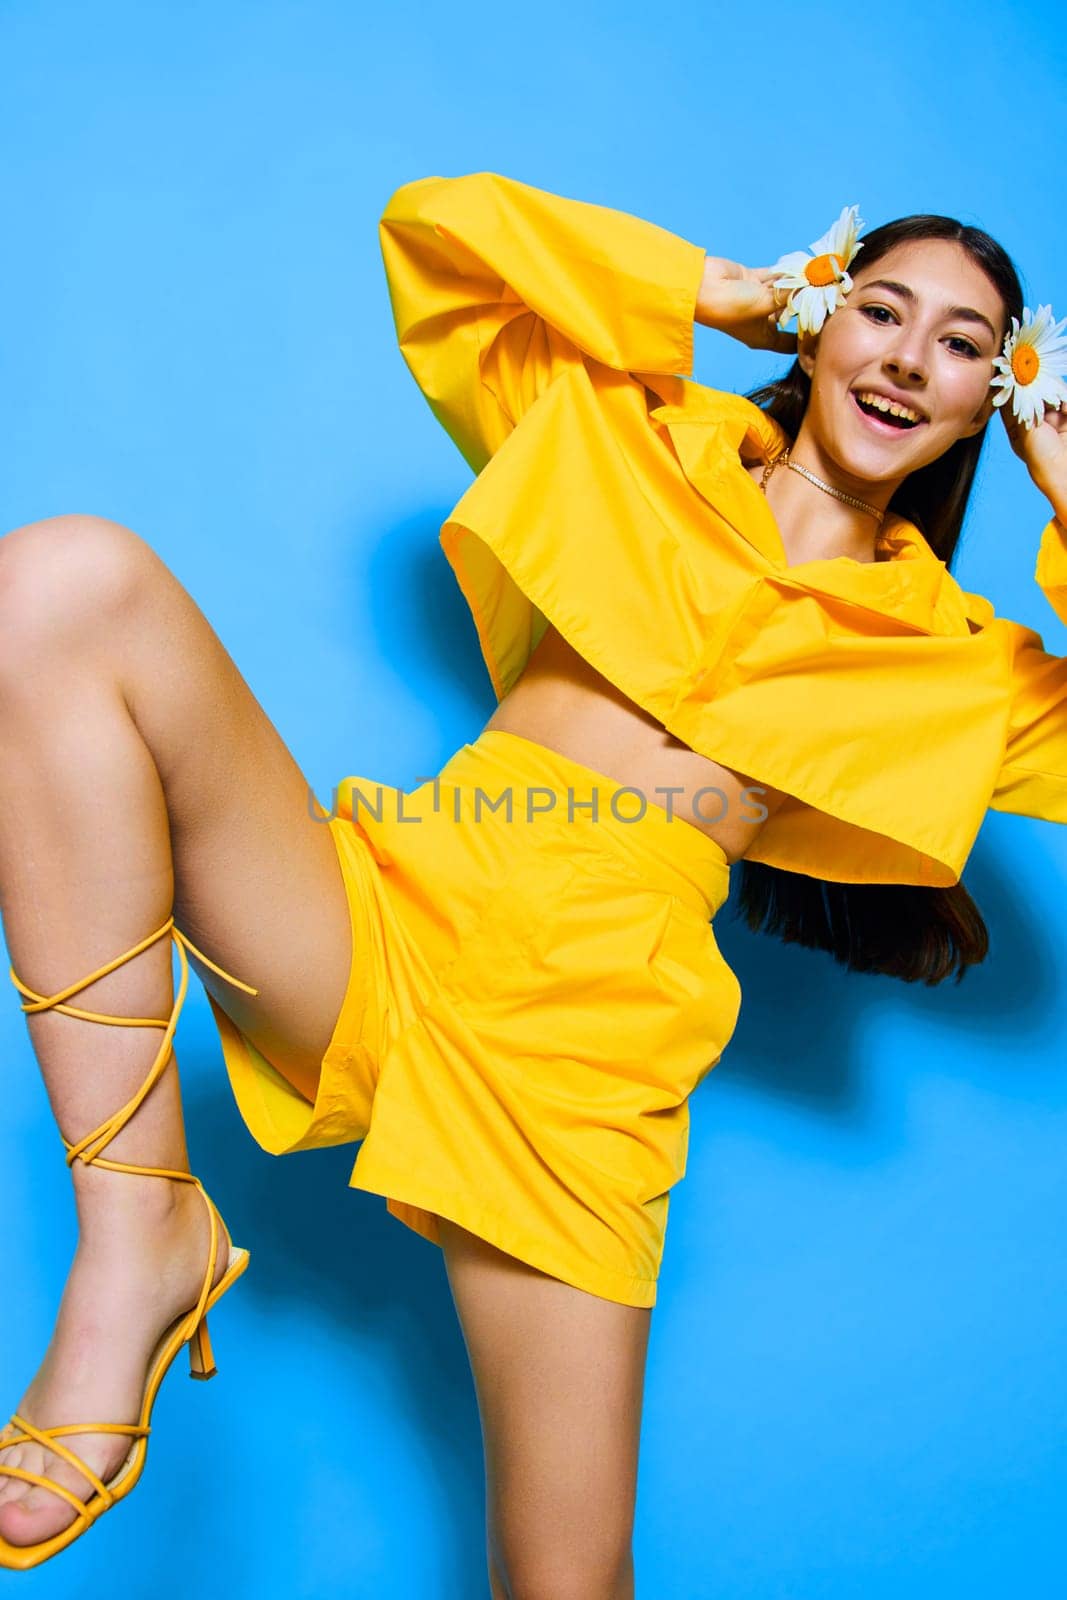 woman emotion joy bouquet face chamomile fashion trend portrait young smile flower yellow cheerful happiness model caucasian blue female beautiful romantic